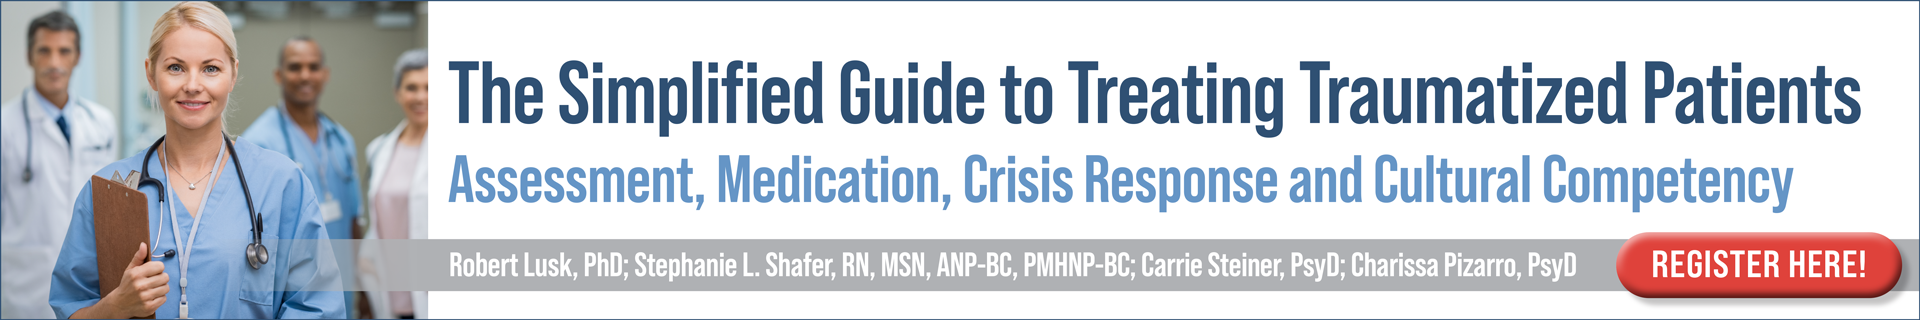 The Simplified Guide to Treating Traumatized Patients: Assessment, Medication, Crisis Response and Cultural Competency